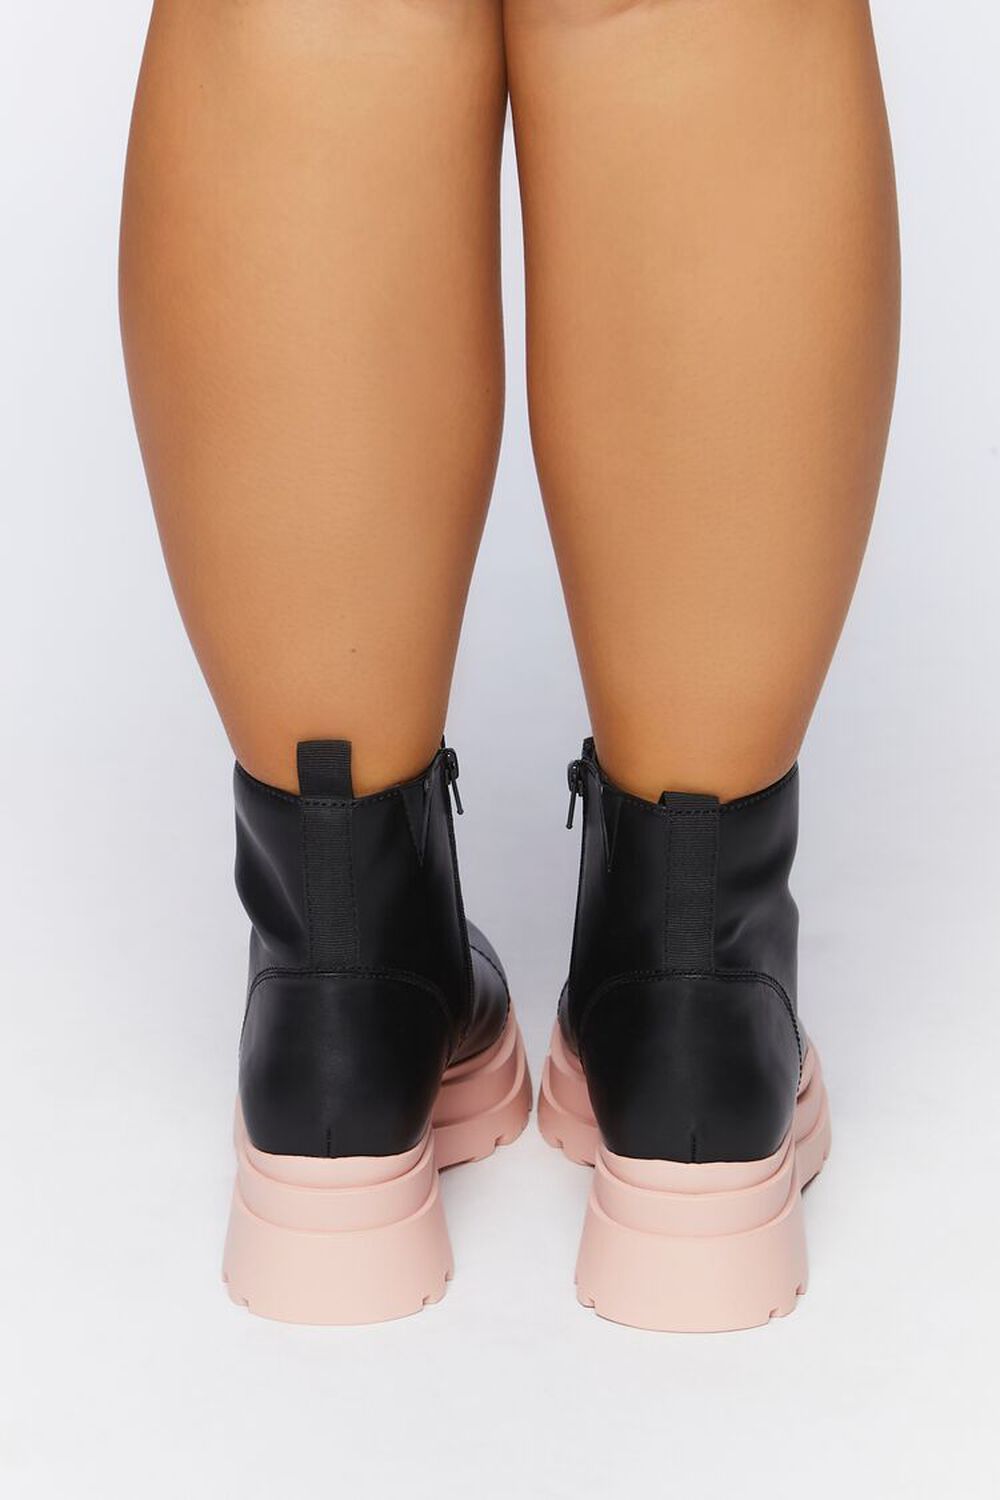 BLACK/BLUSH Faux Leather Lug Booties (Wide), image 3